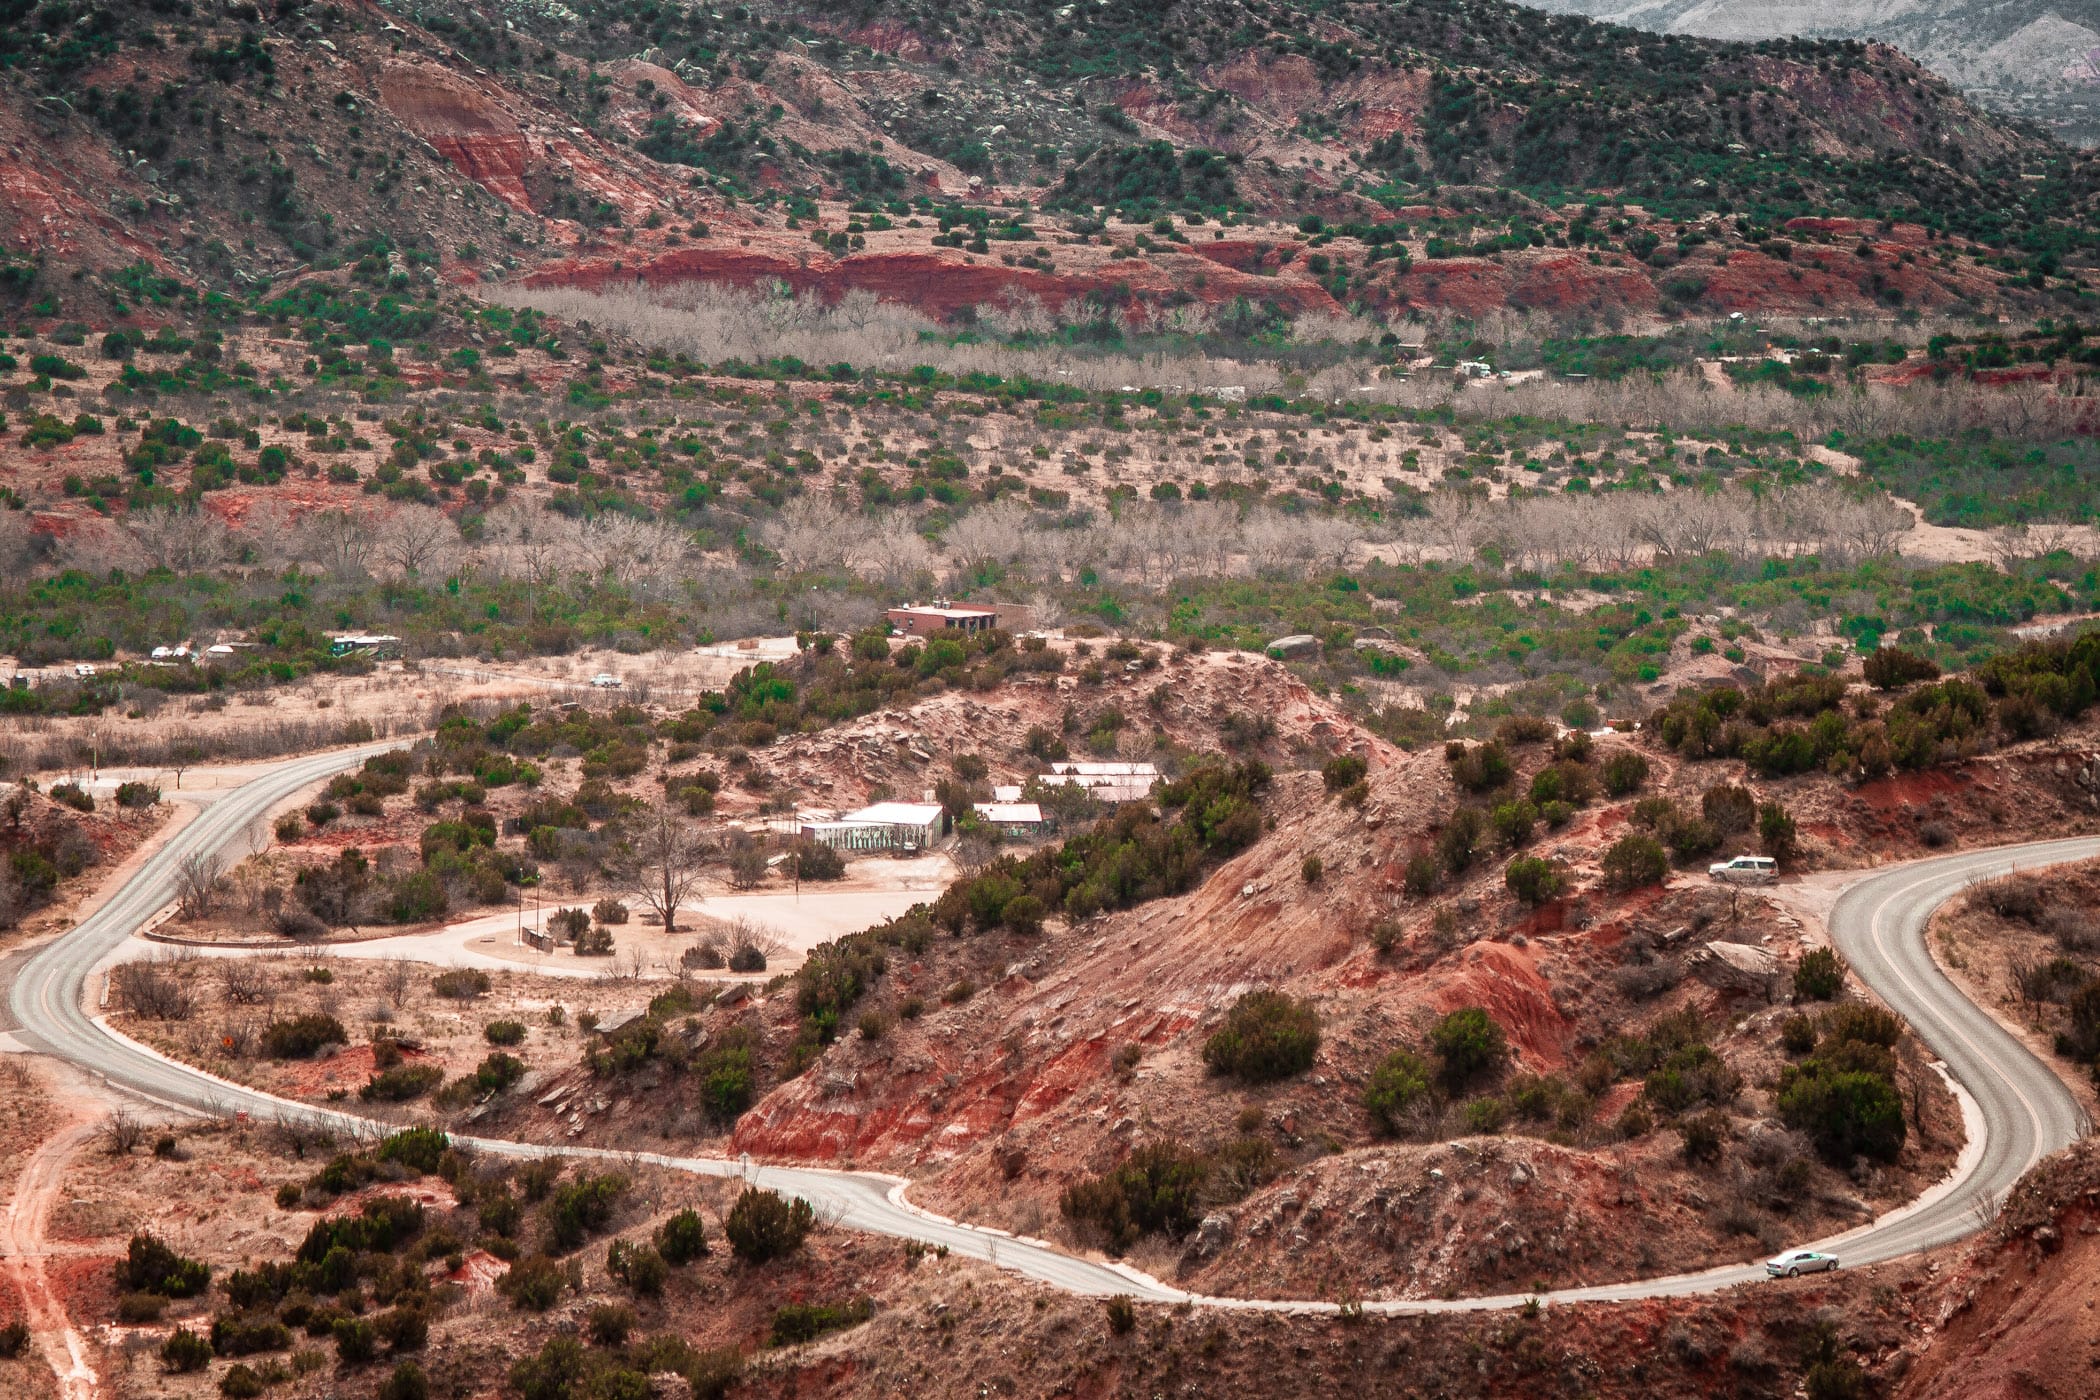 Park Road 5 descends more than 800 feet to the bottom of Palo Duro Canyon, Texas.